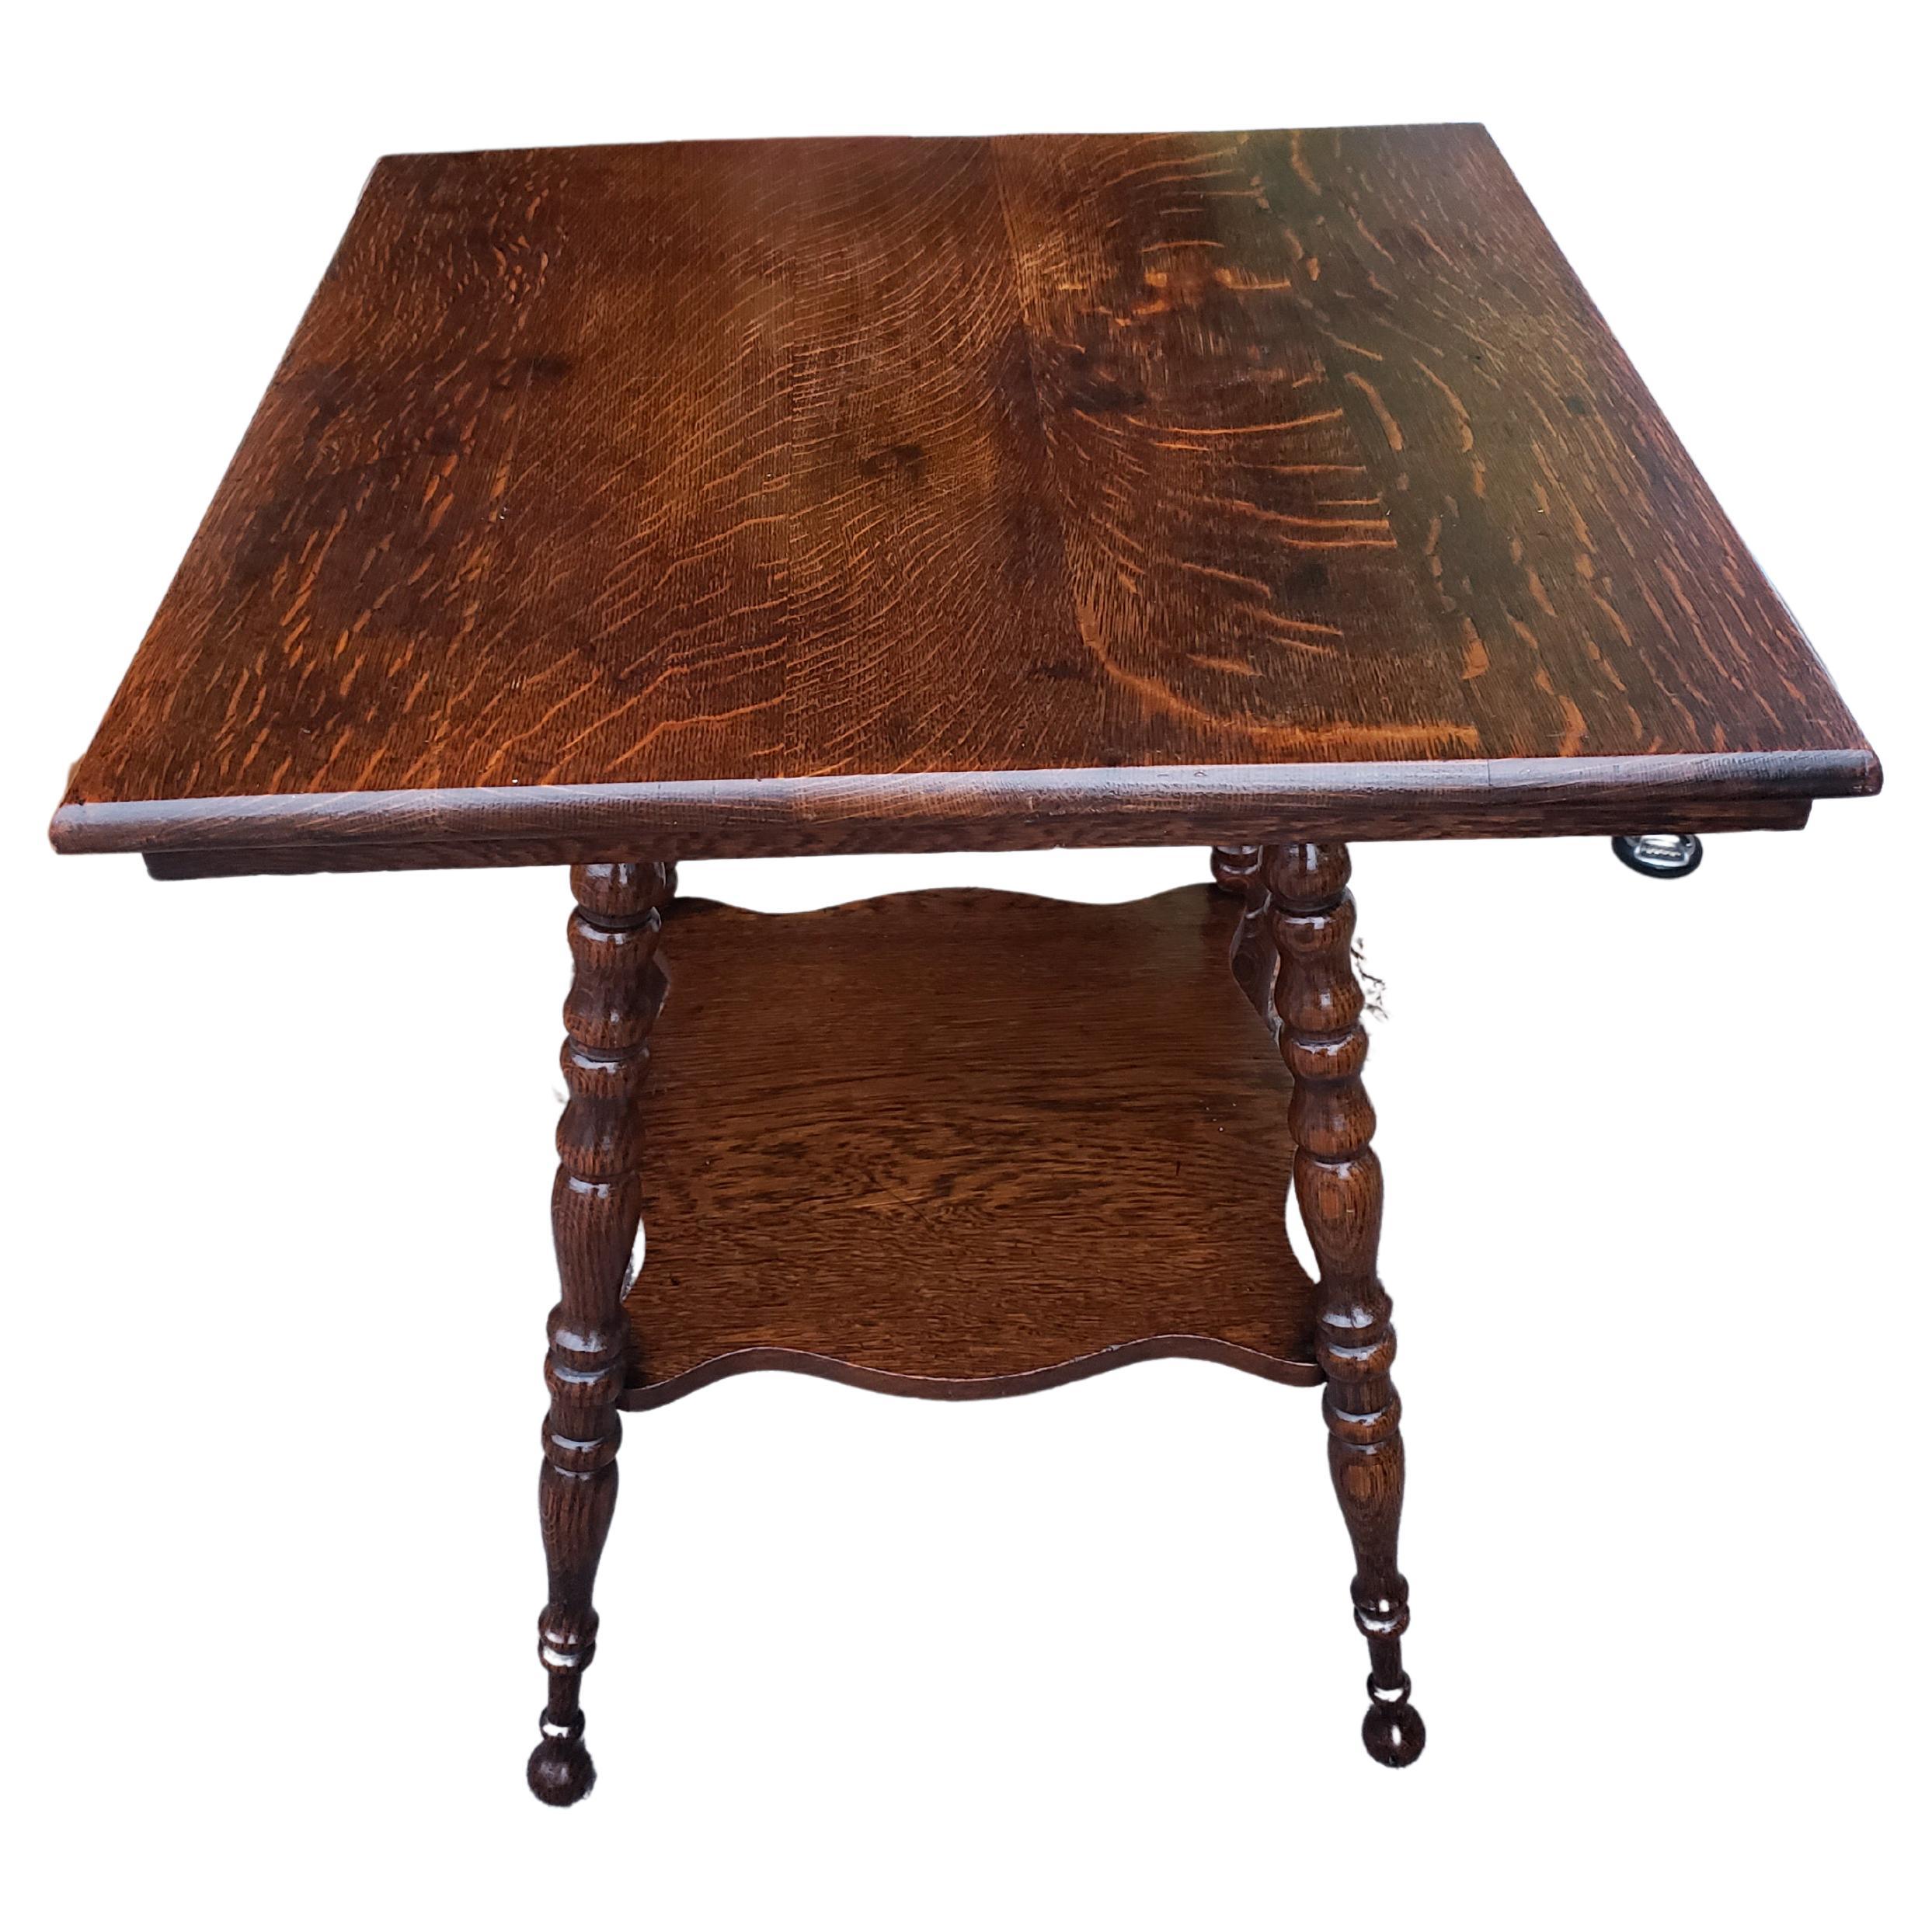 Hand-Crafted 1940s Square Quarter Sawn Tiger Oak Two-Tier Parlor Table with Bobbin Legs